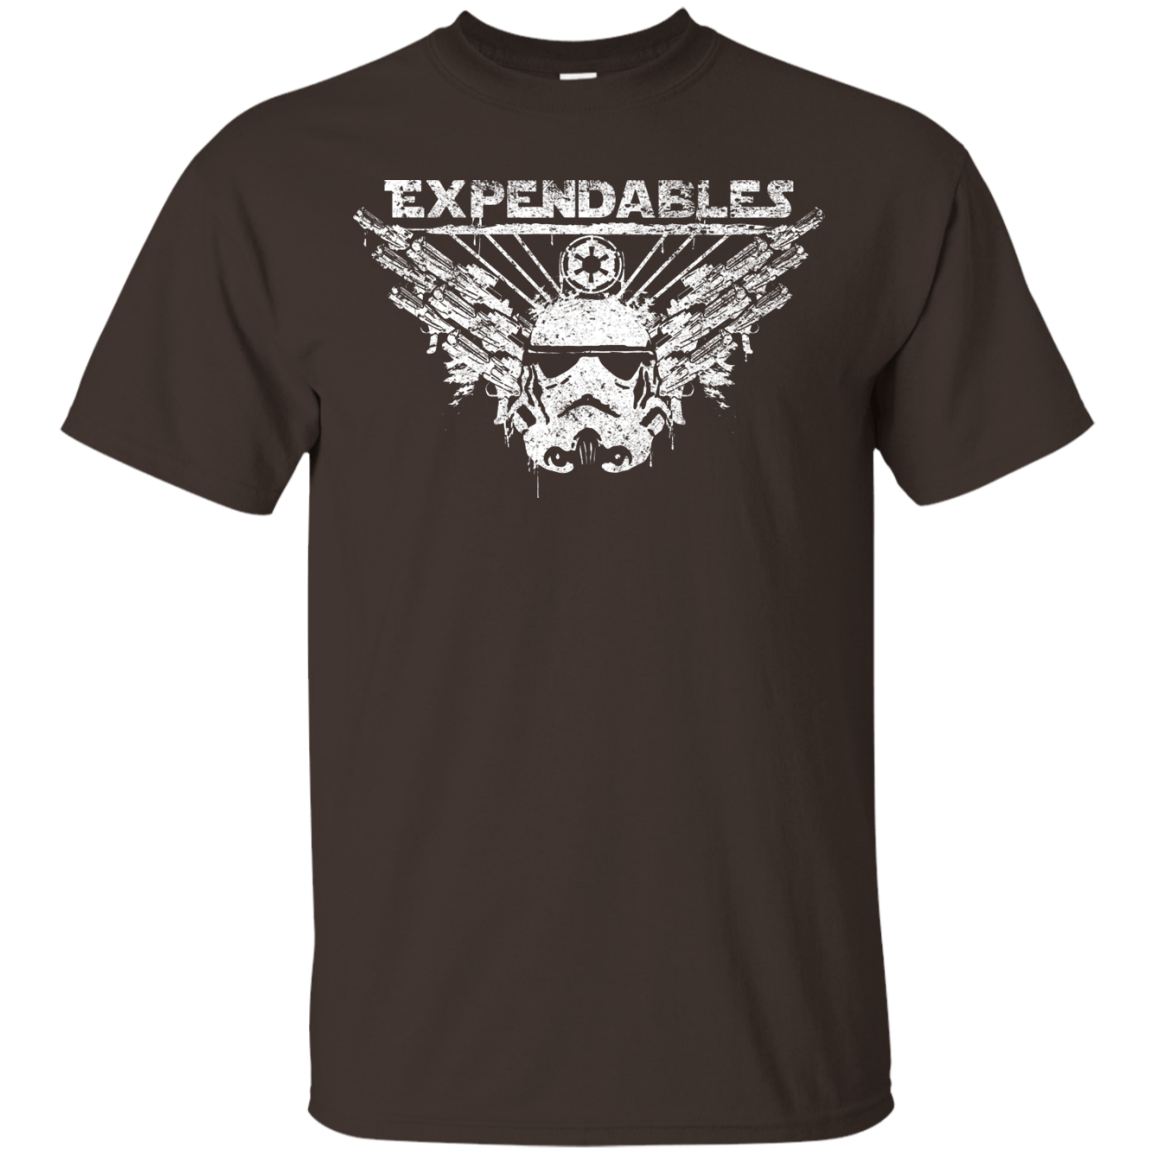 T-Shirts Dark Chocolate / S Expendable Troopers T-Shirt